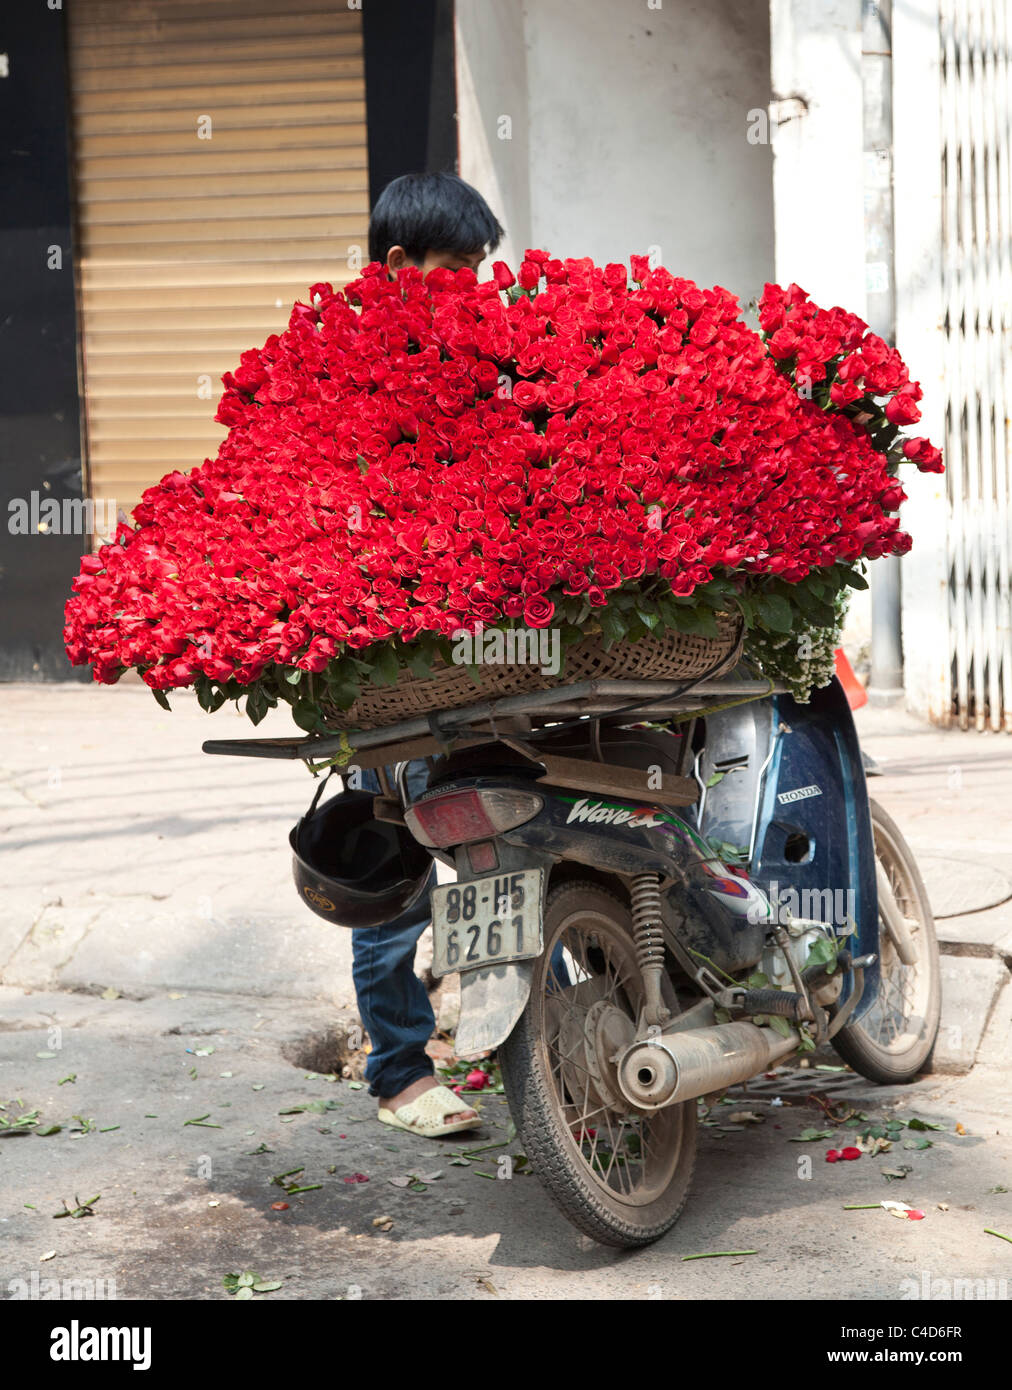 Street market seller with red roses for sale on the back of a motor cycle. Hanoi, Vietnam. motor bike Stock Photo